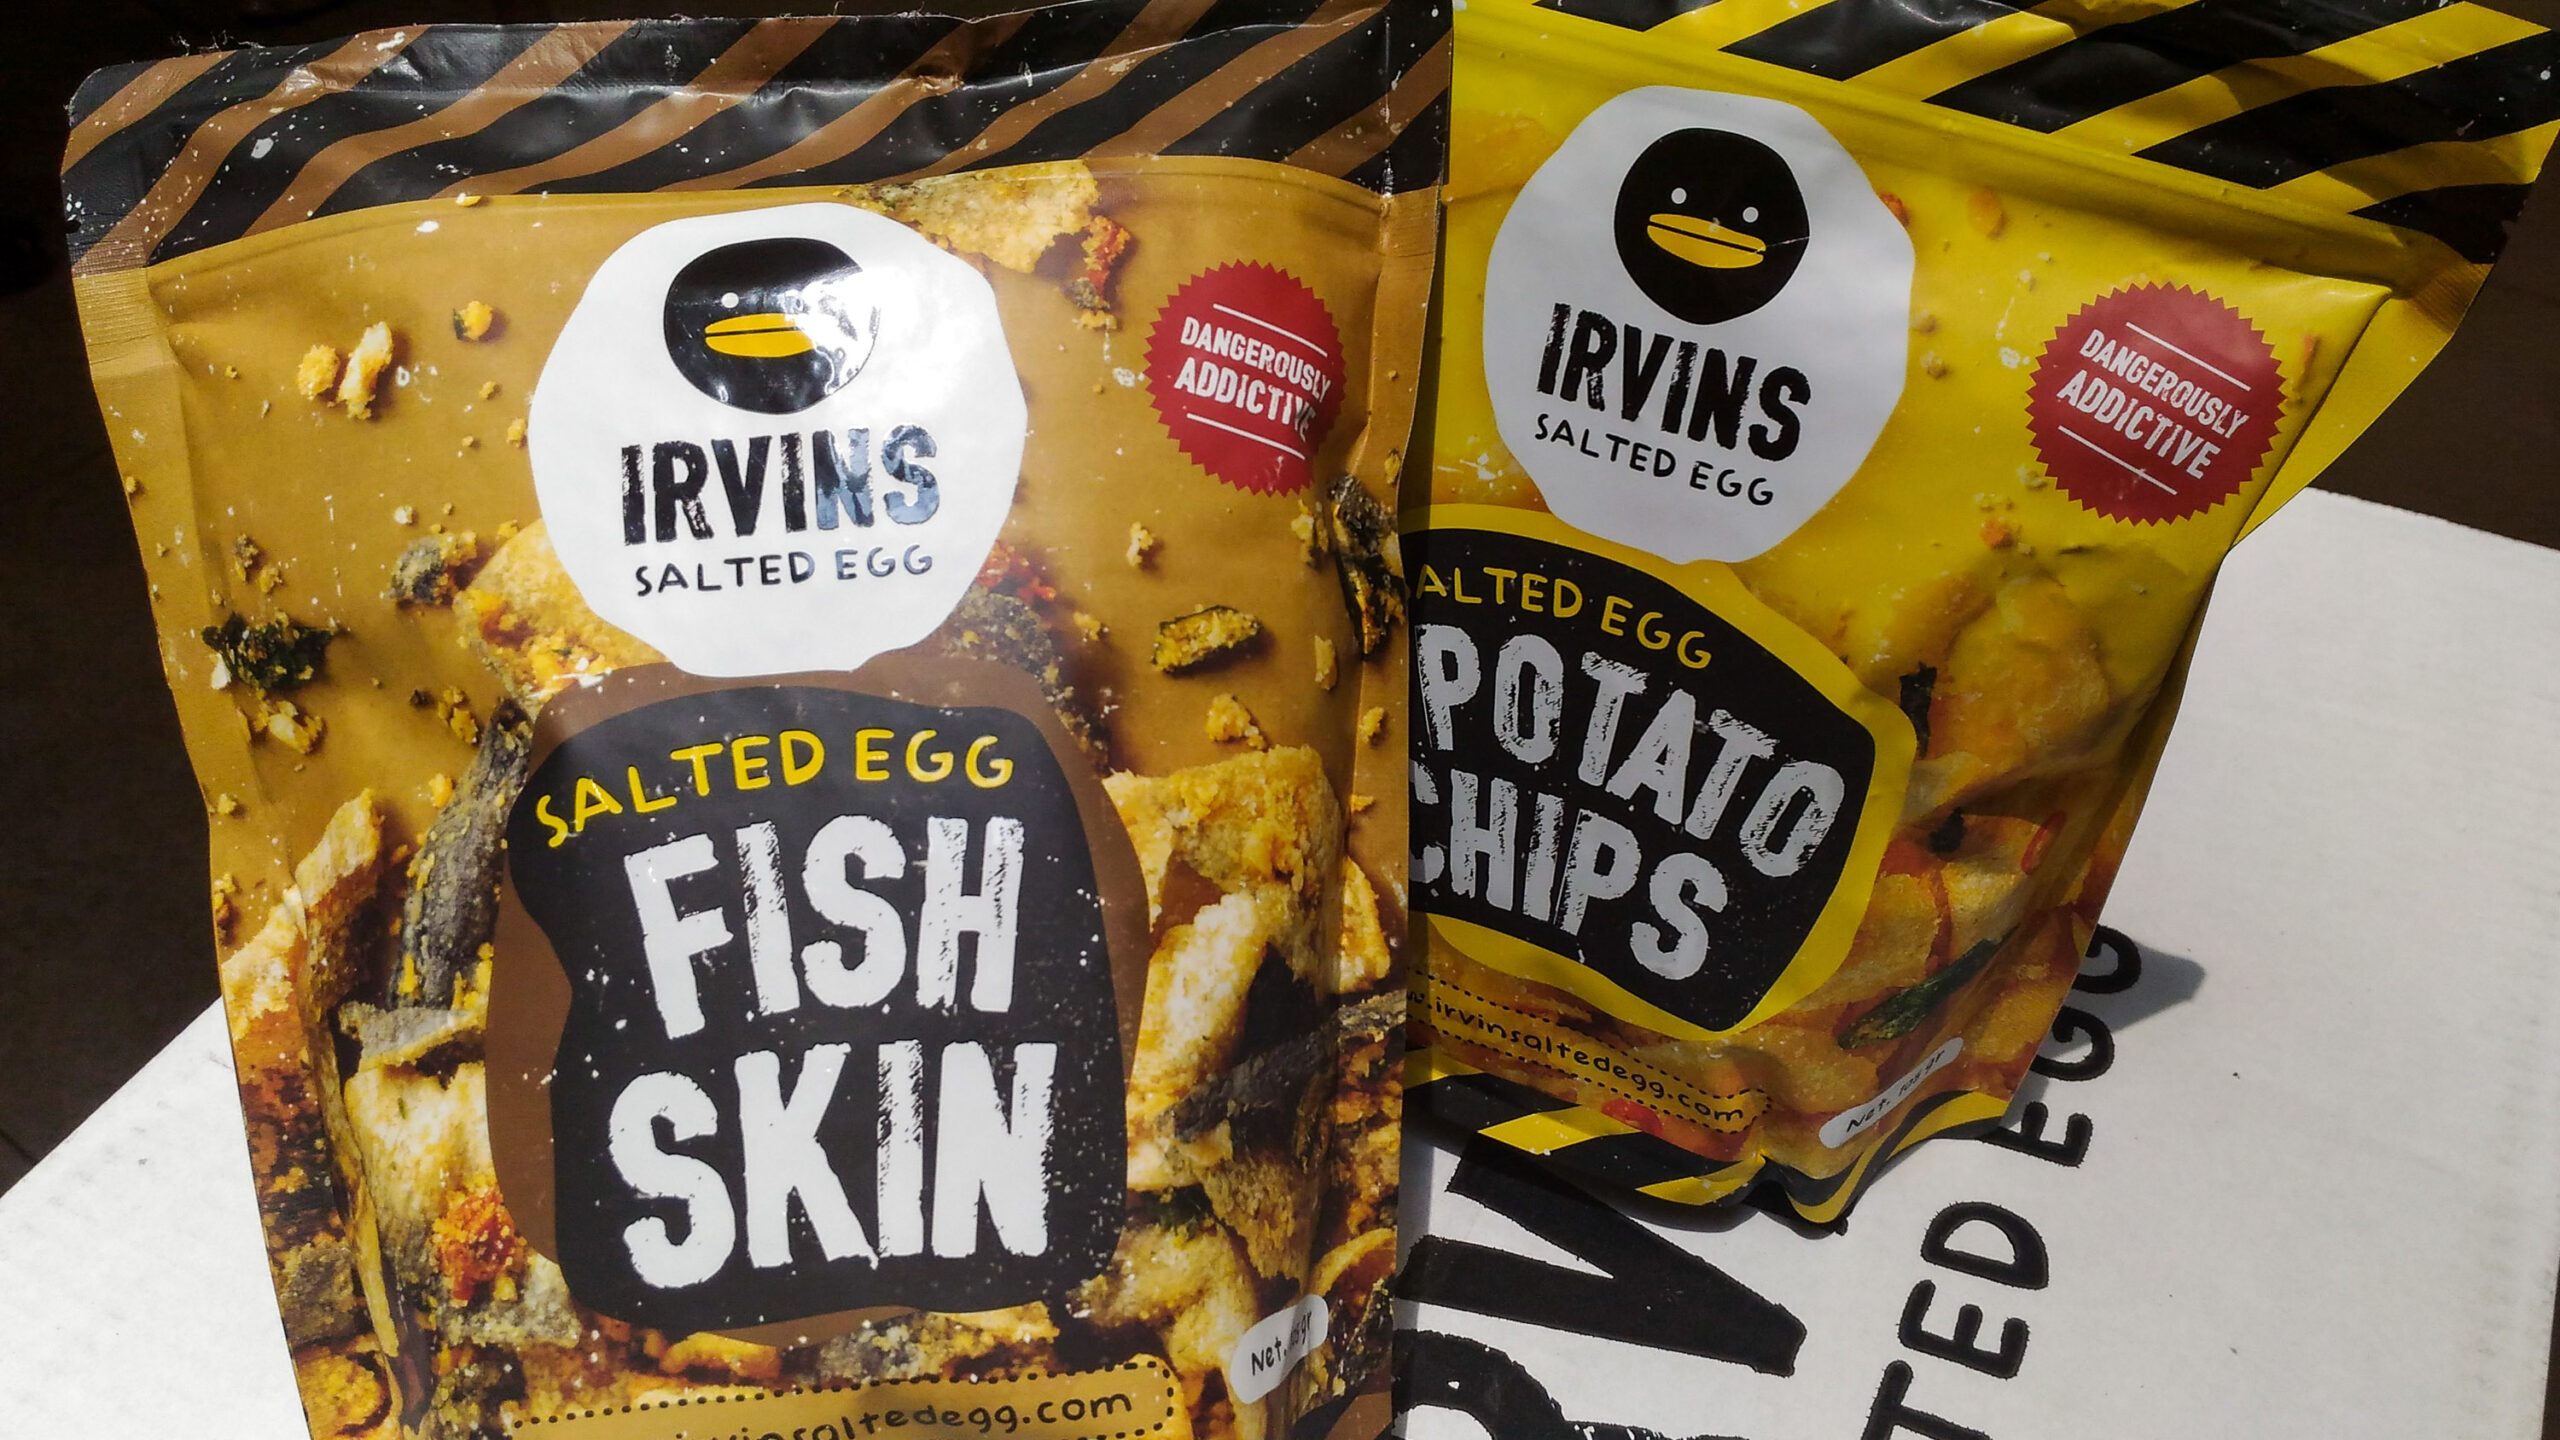 Irvins Salted Egg chips are in Manila!